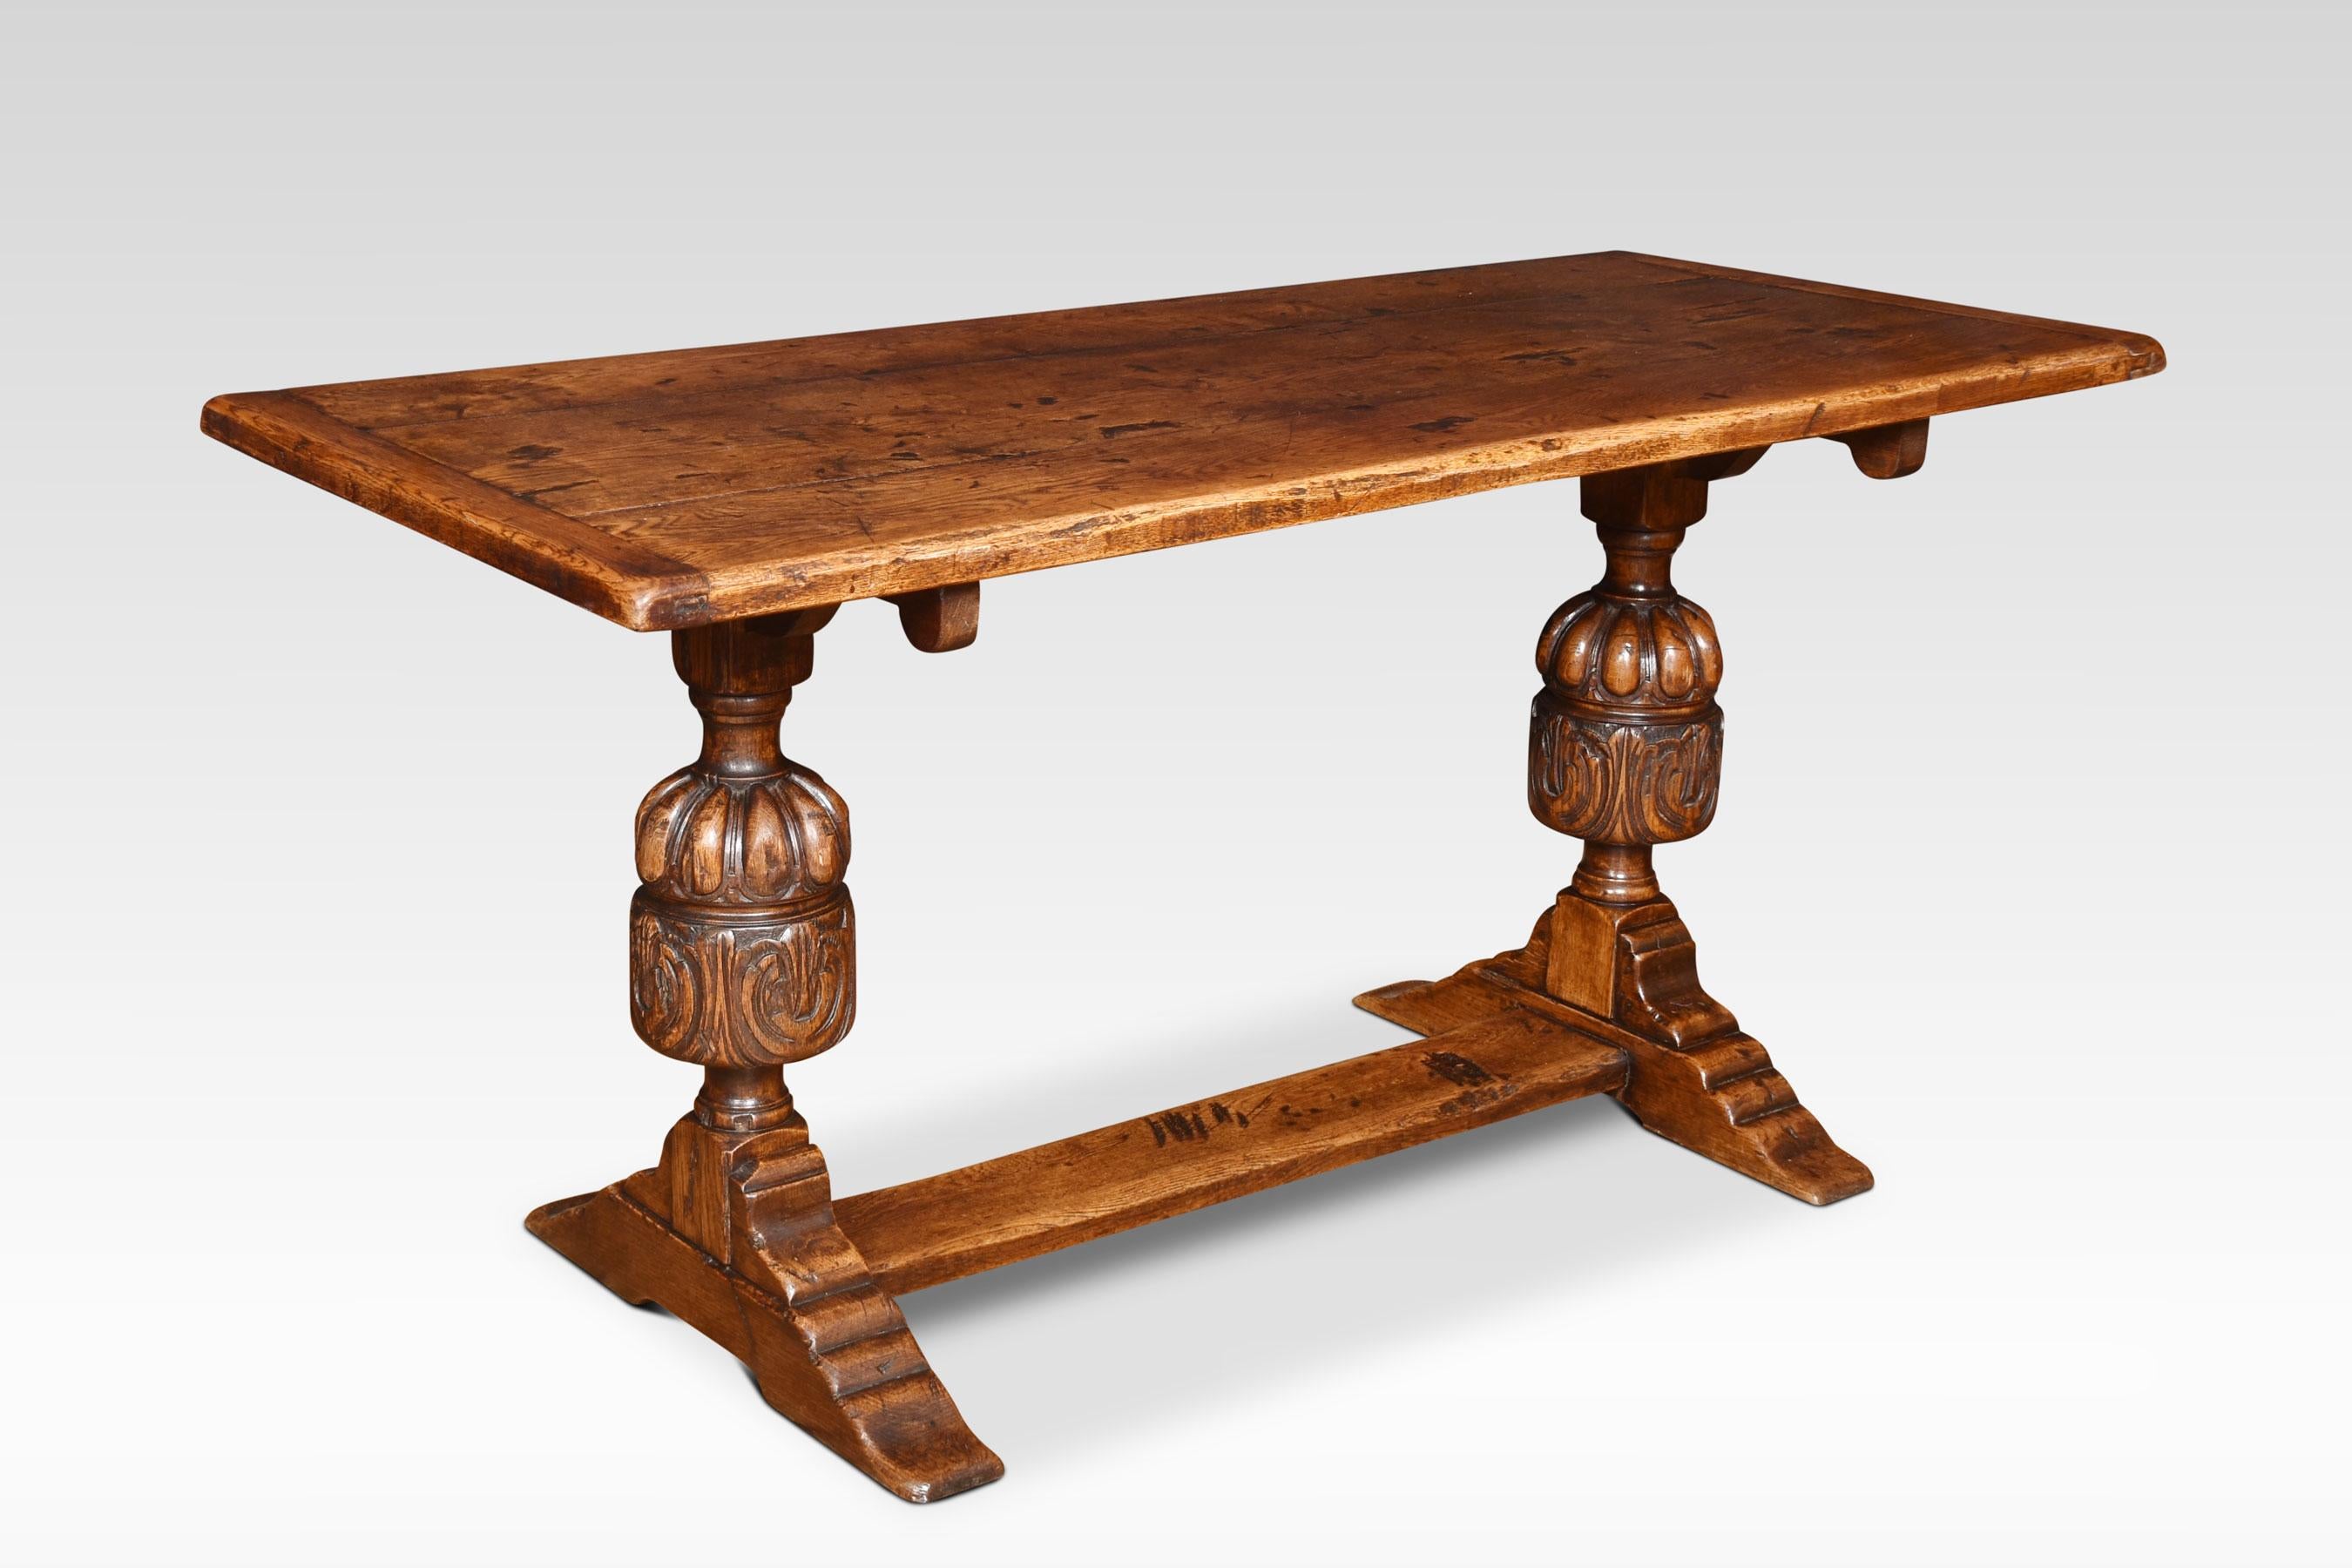 Oak refectory table, the rectangular solid oak top. Above carved bulbous cup and cover supports united by a stretcher.
Dimensions
Height 29.5 Inches
Width 61 Inches
Depth 27 Inches.